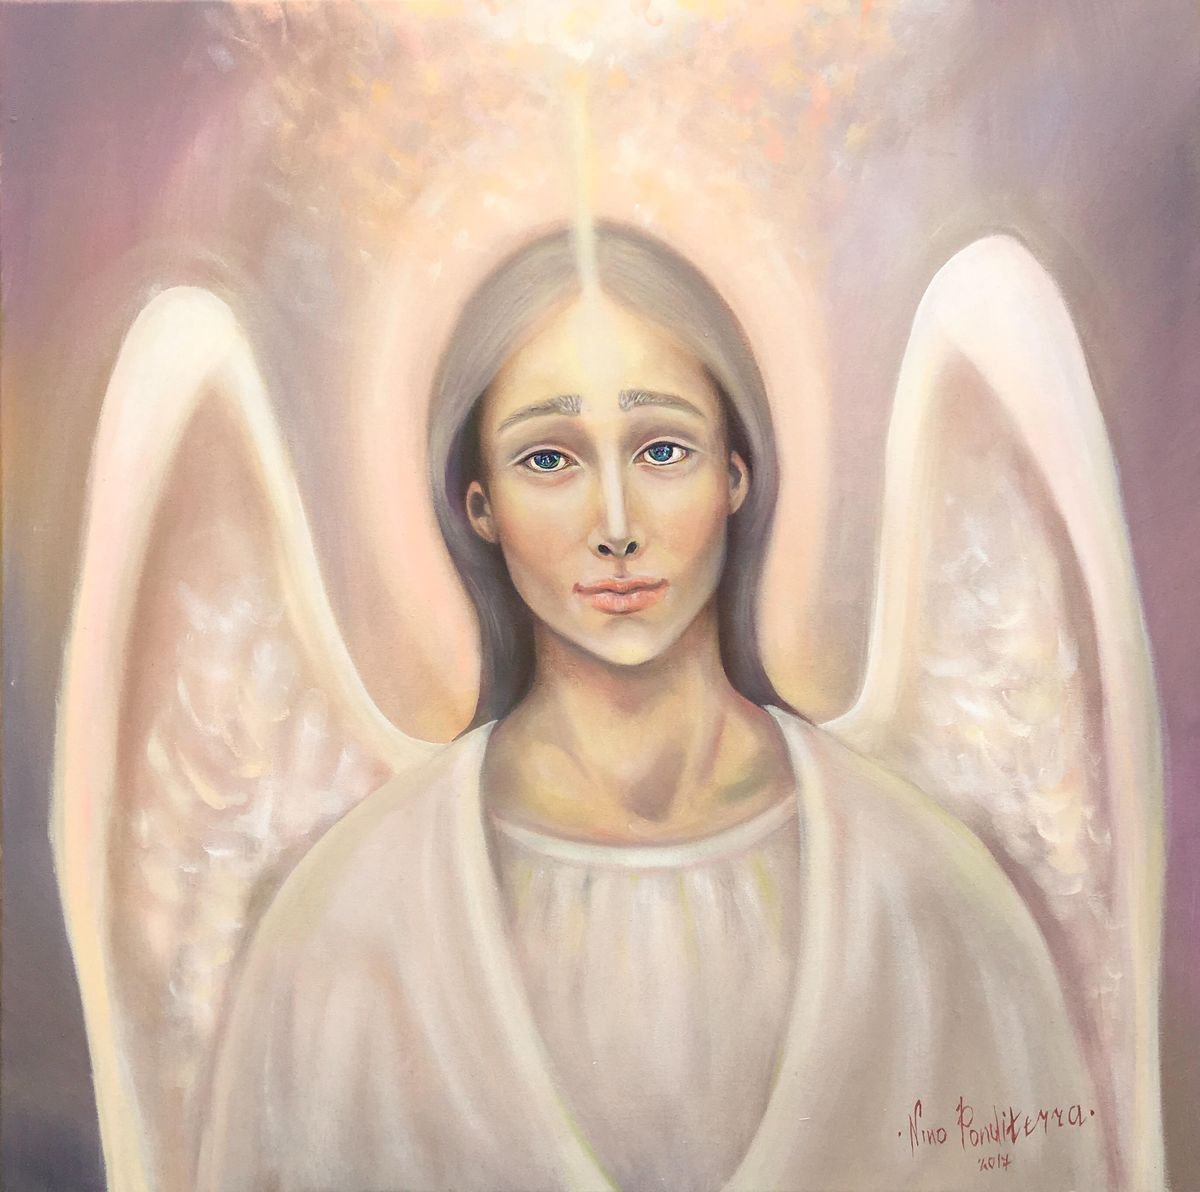 Archangel Anael - original oil painting on stretched canvas by Nino Ponditerra